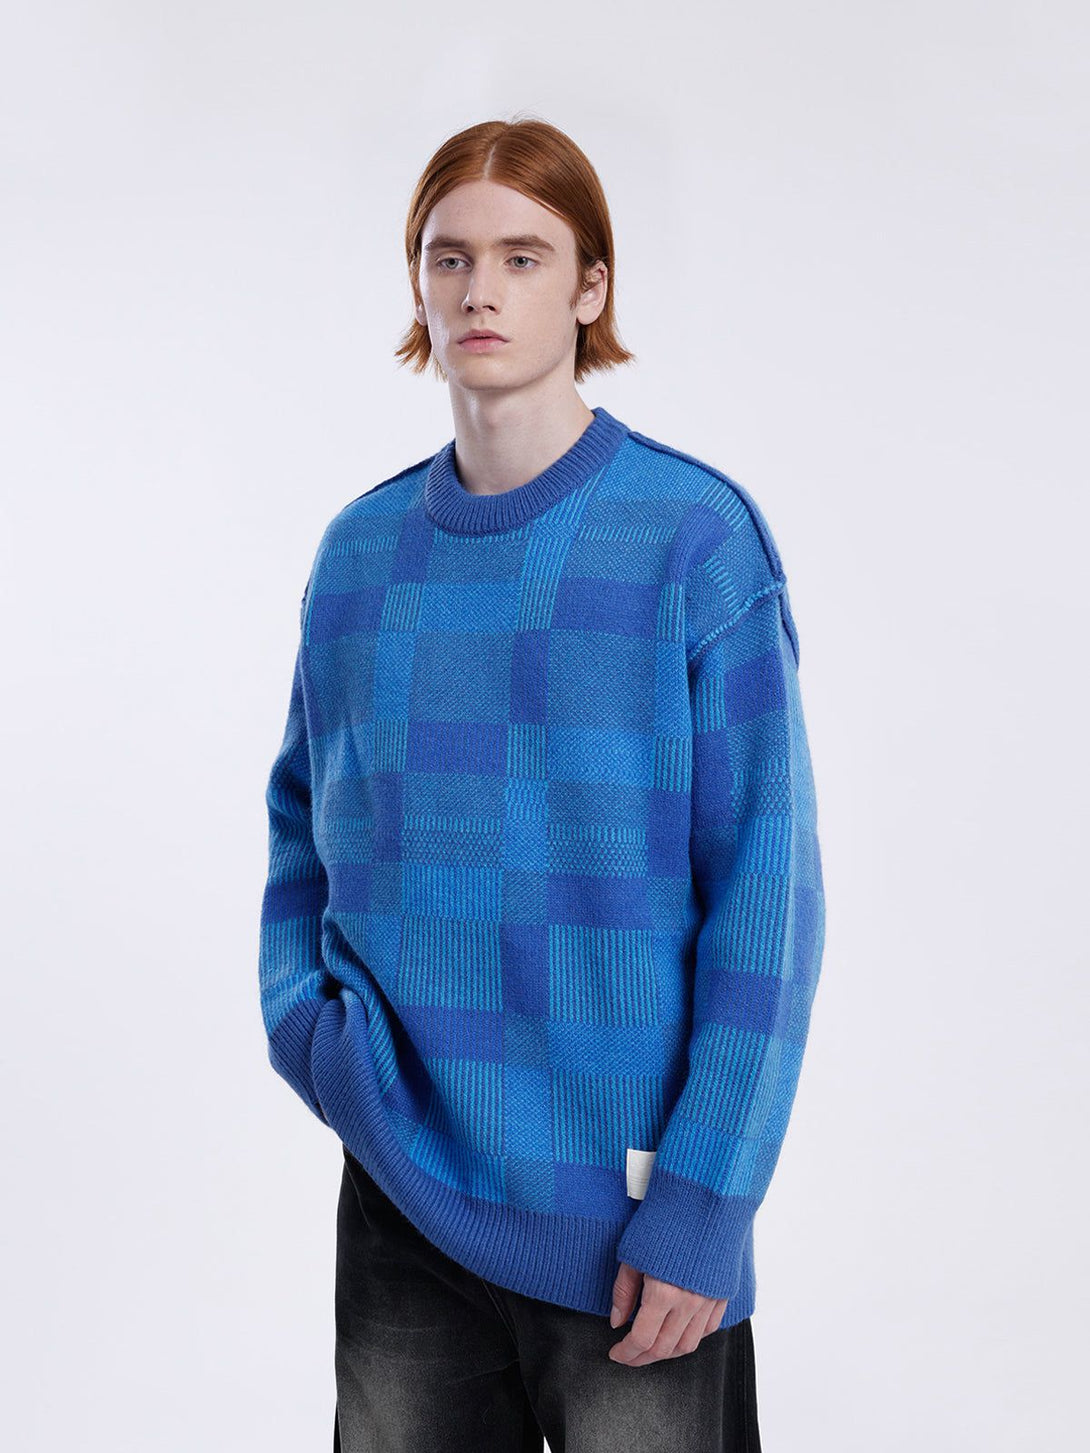 Aelfric Eden 3D Embroidery Plaid Sweater – Aelfric eden